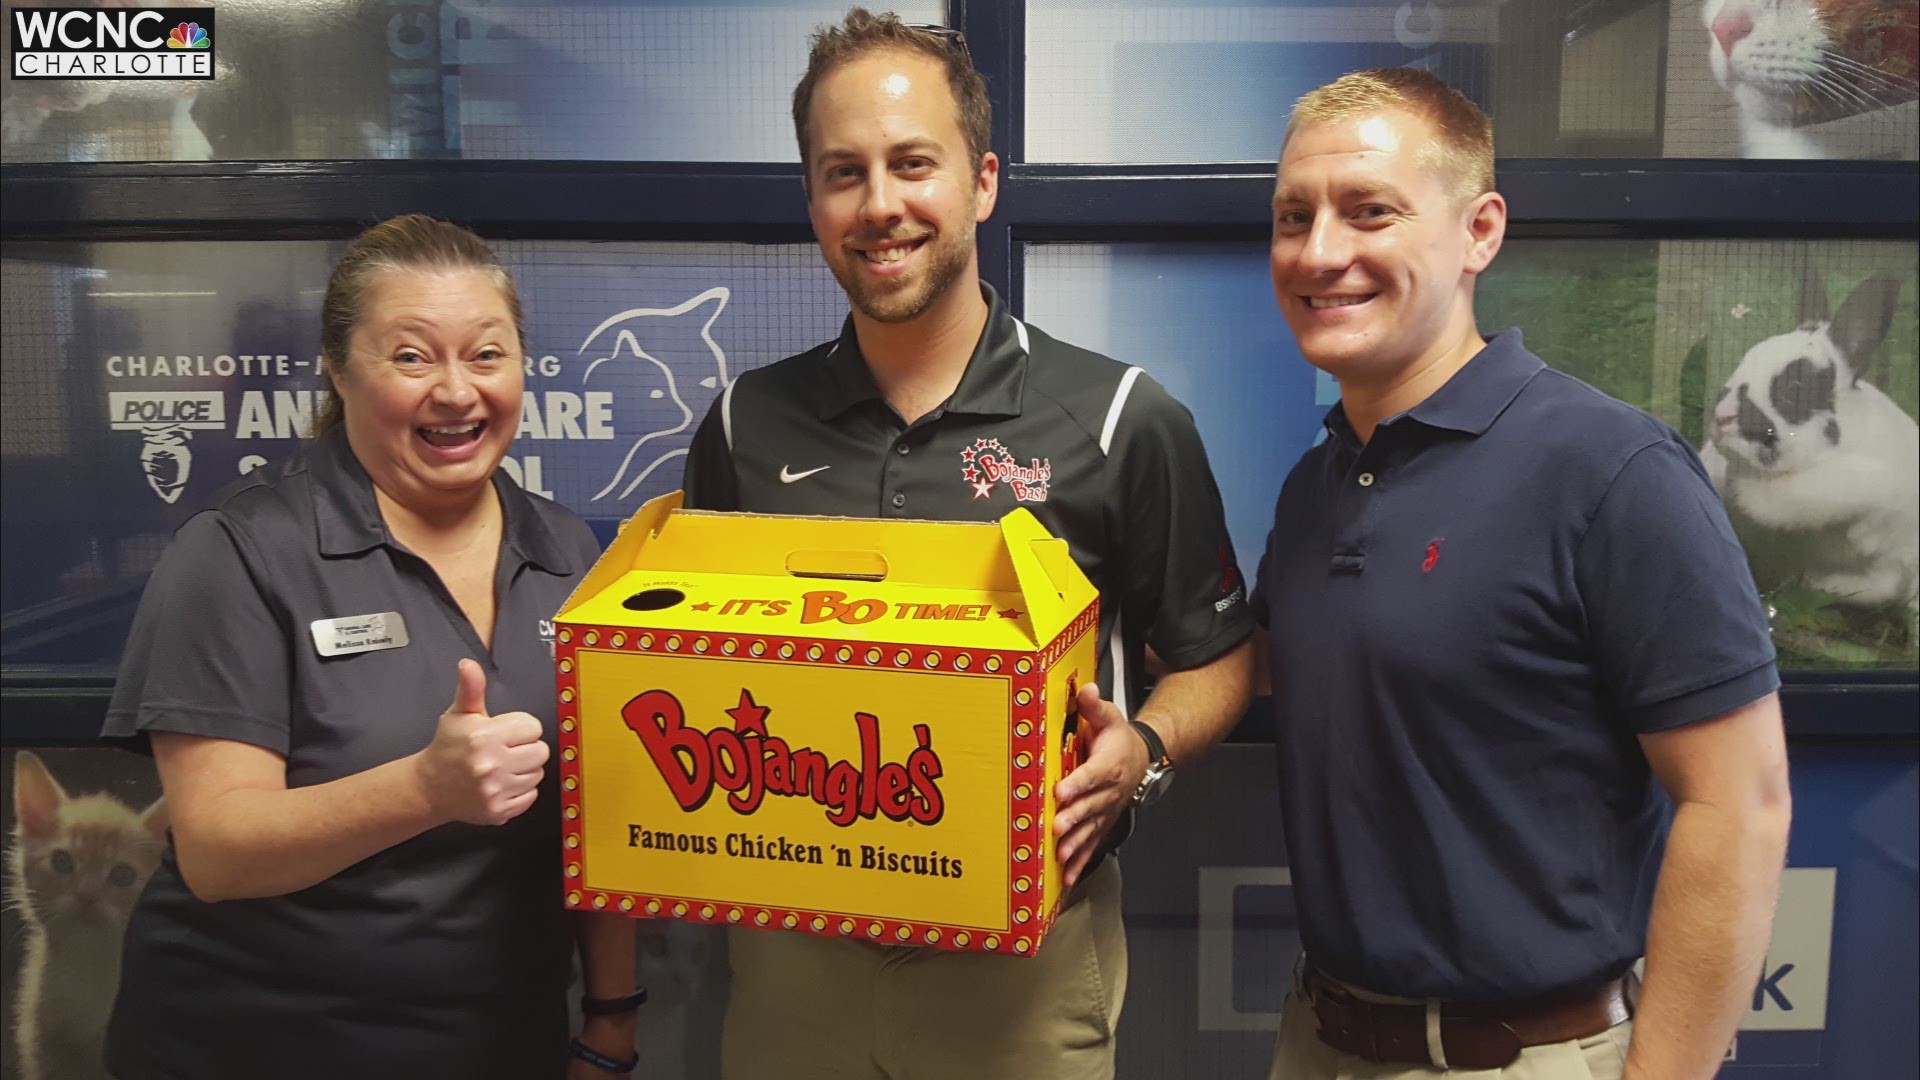 Bojangles comes to the rescue when shelter runs out of boxes